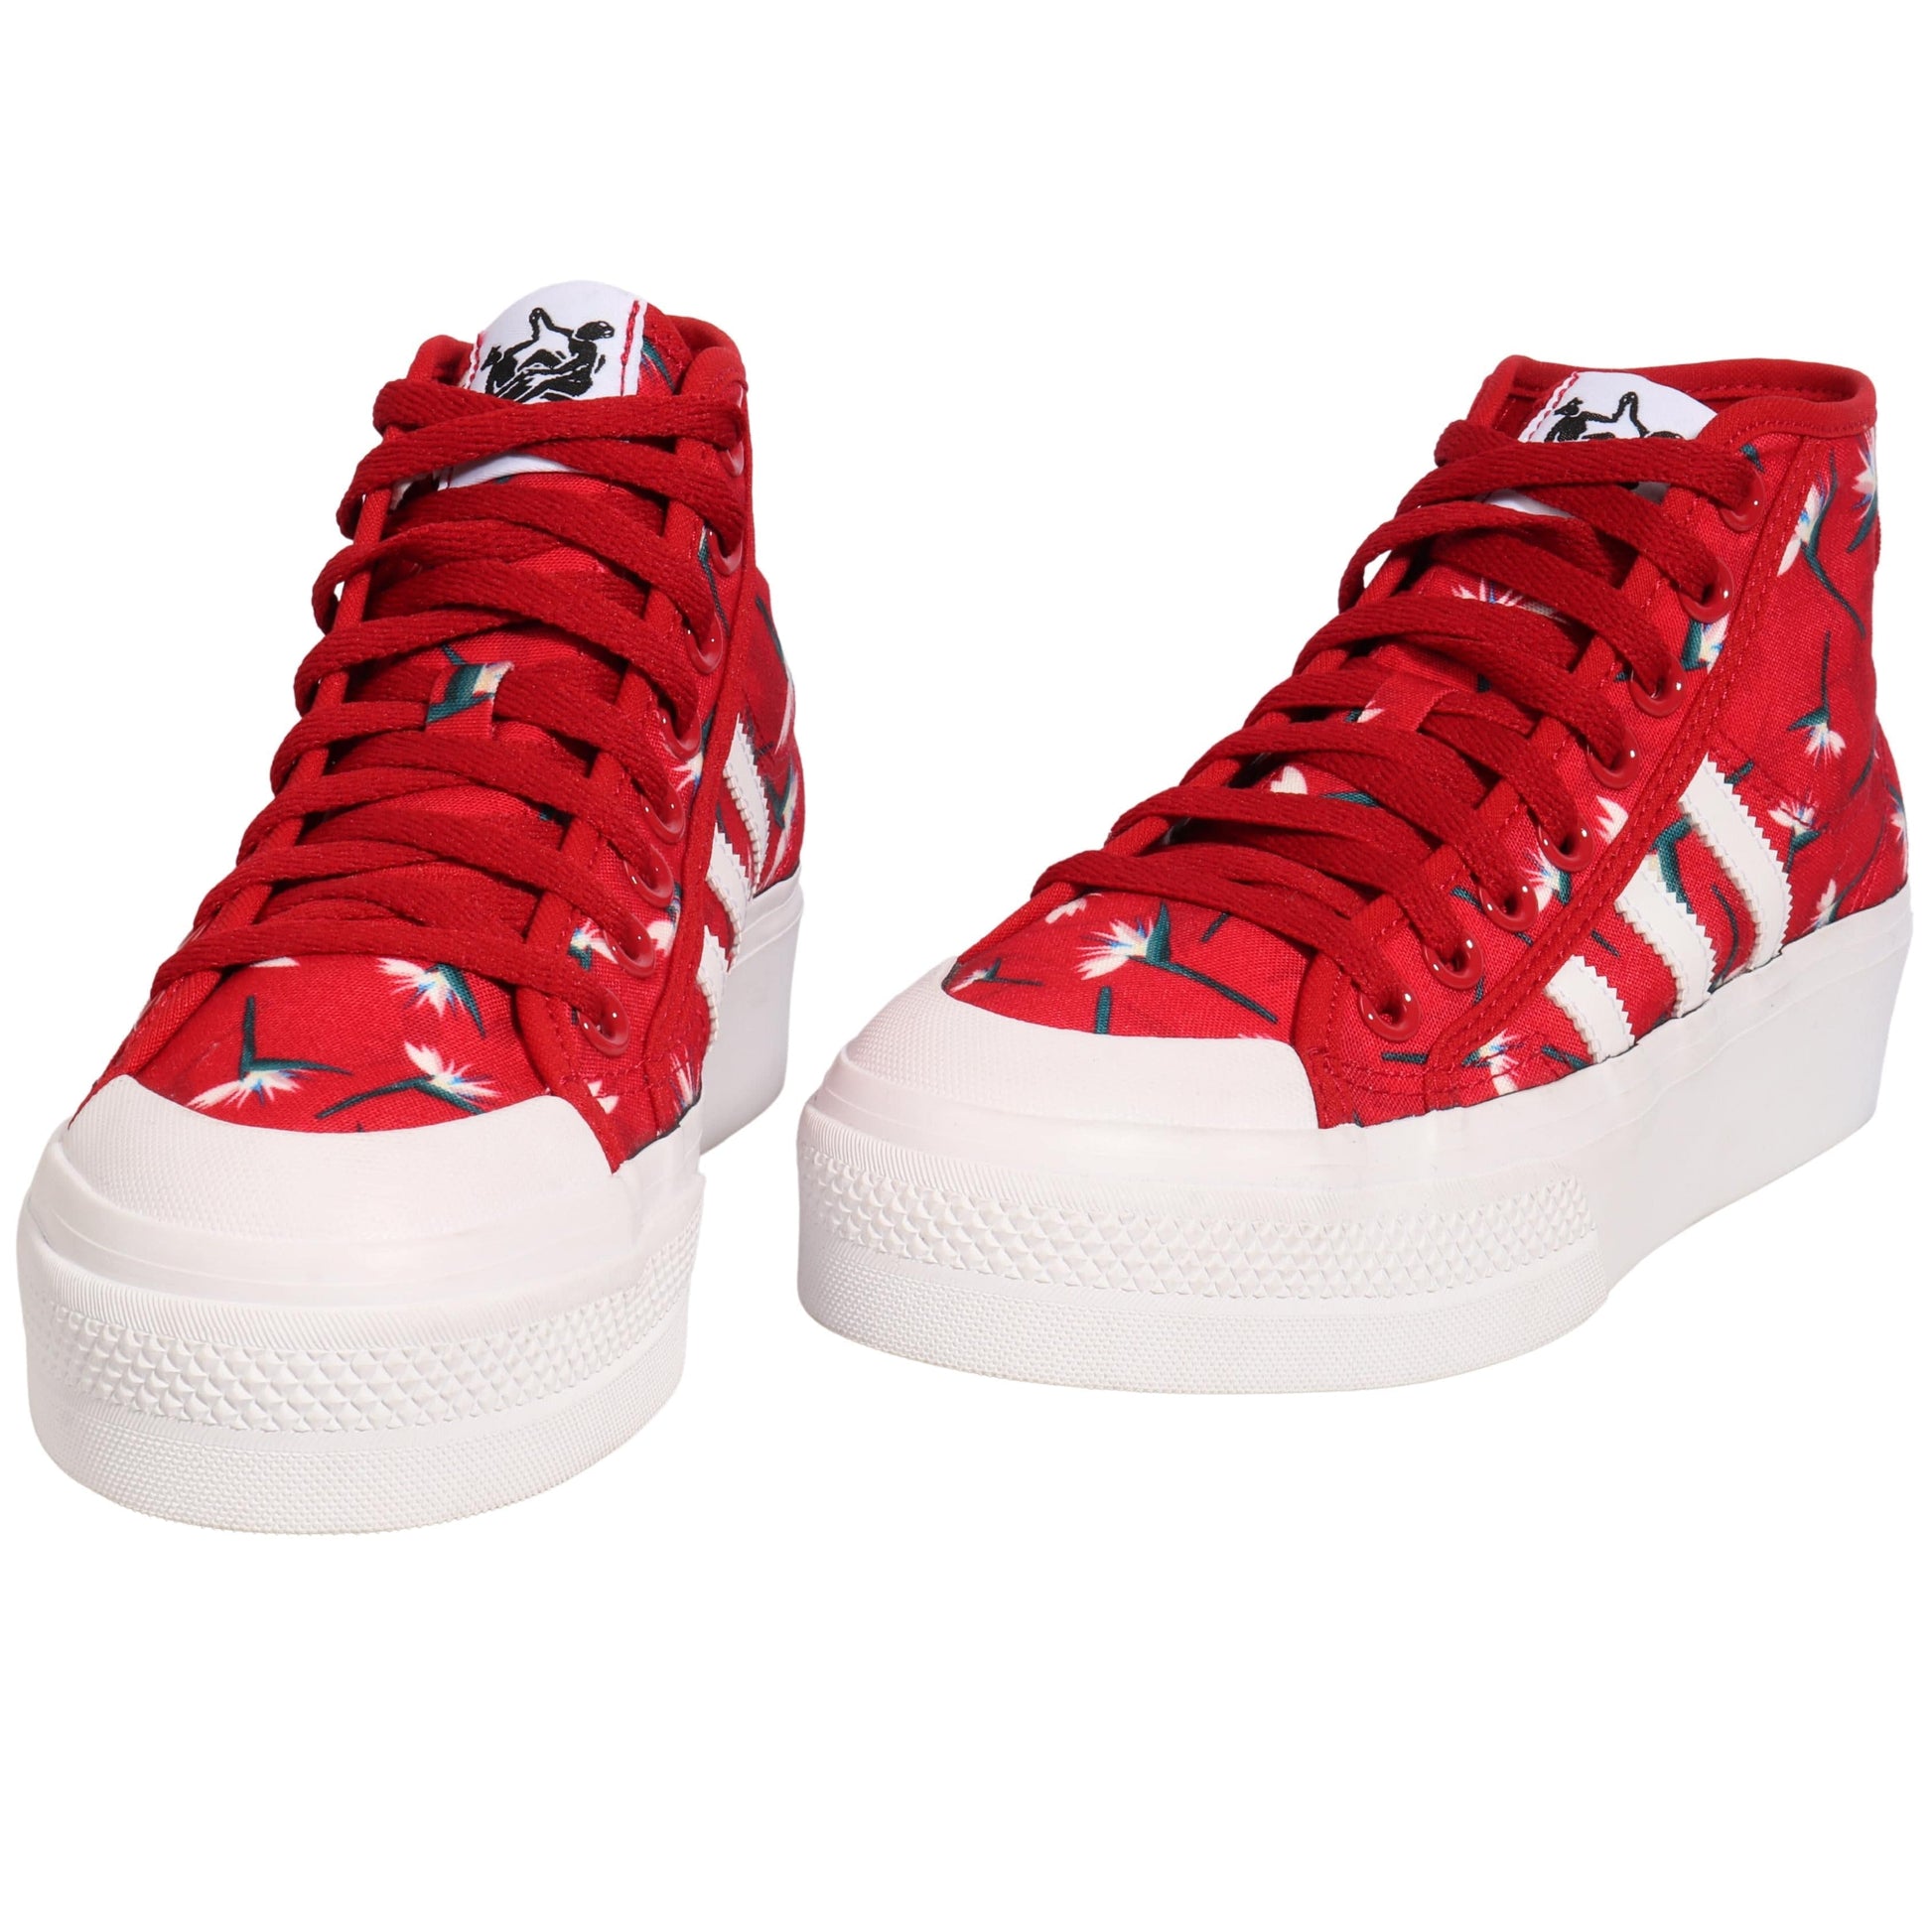 ADIDAS Athletic Shoes 38.5 / Red ADIDAS - Nizza Platform Mid Thebe Madudu Casual Shoes